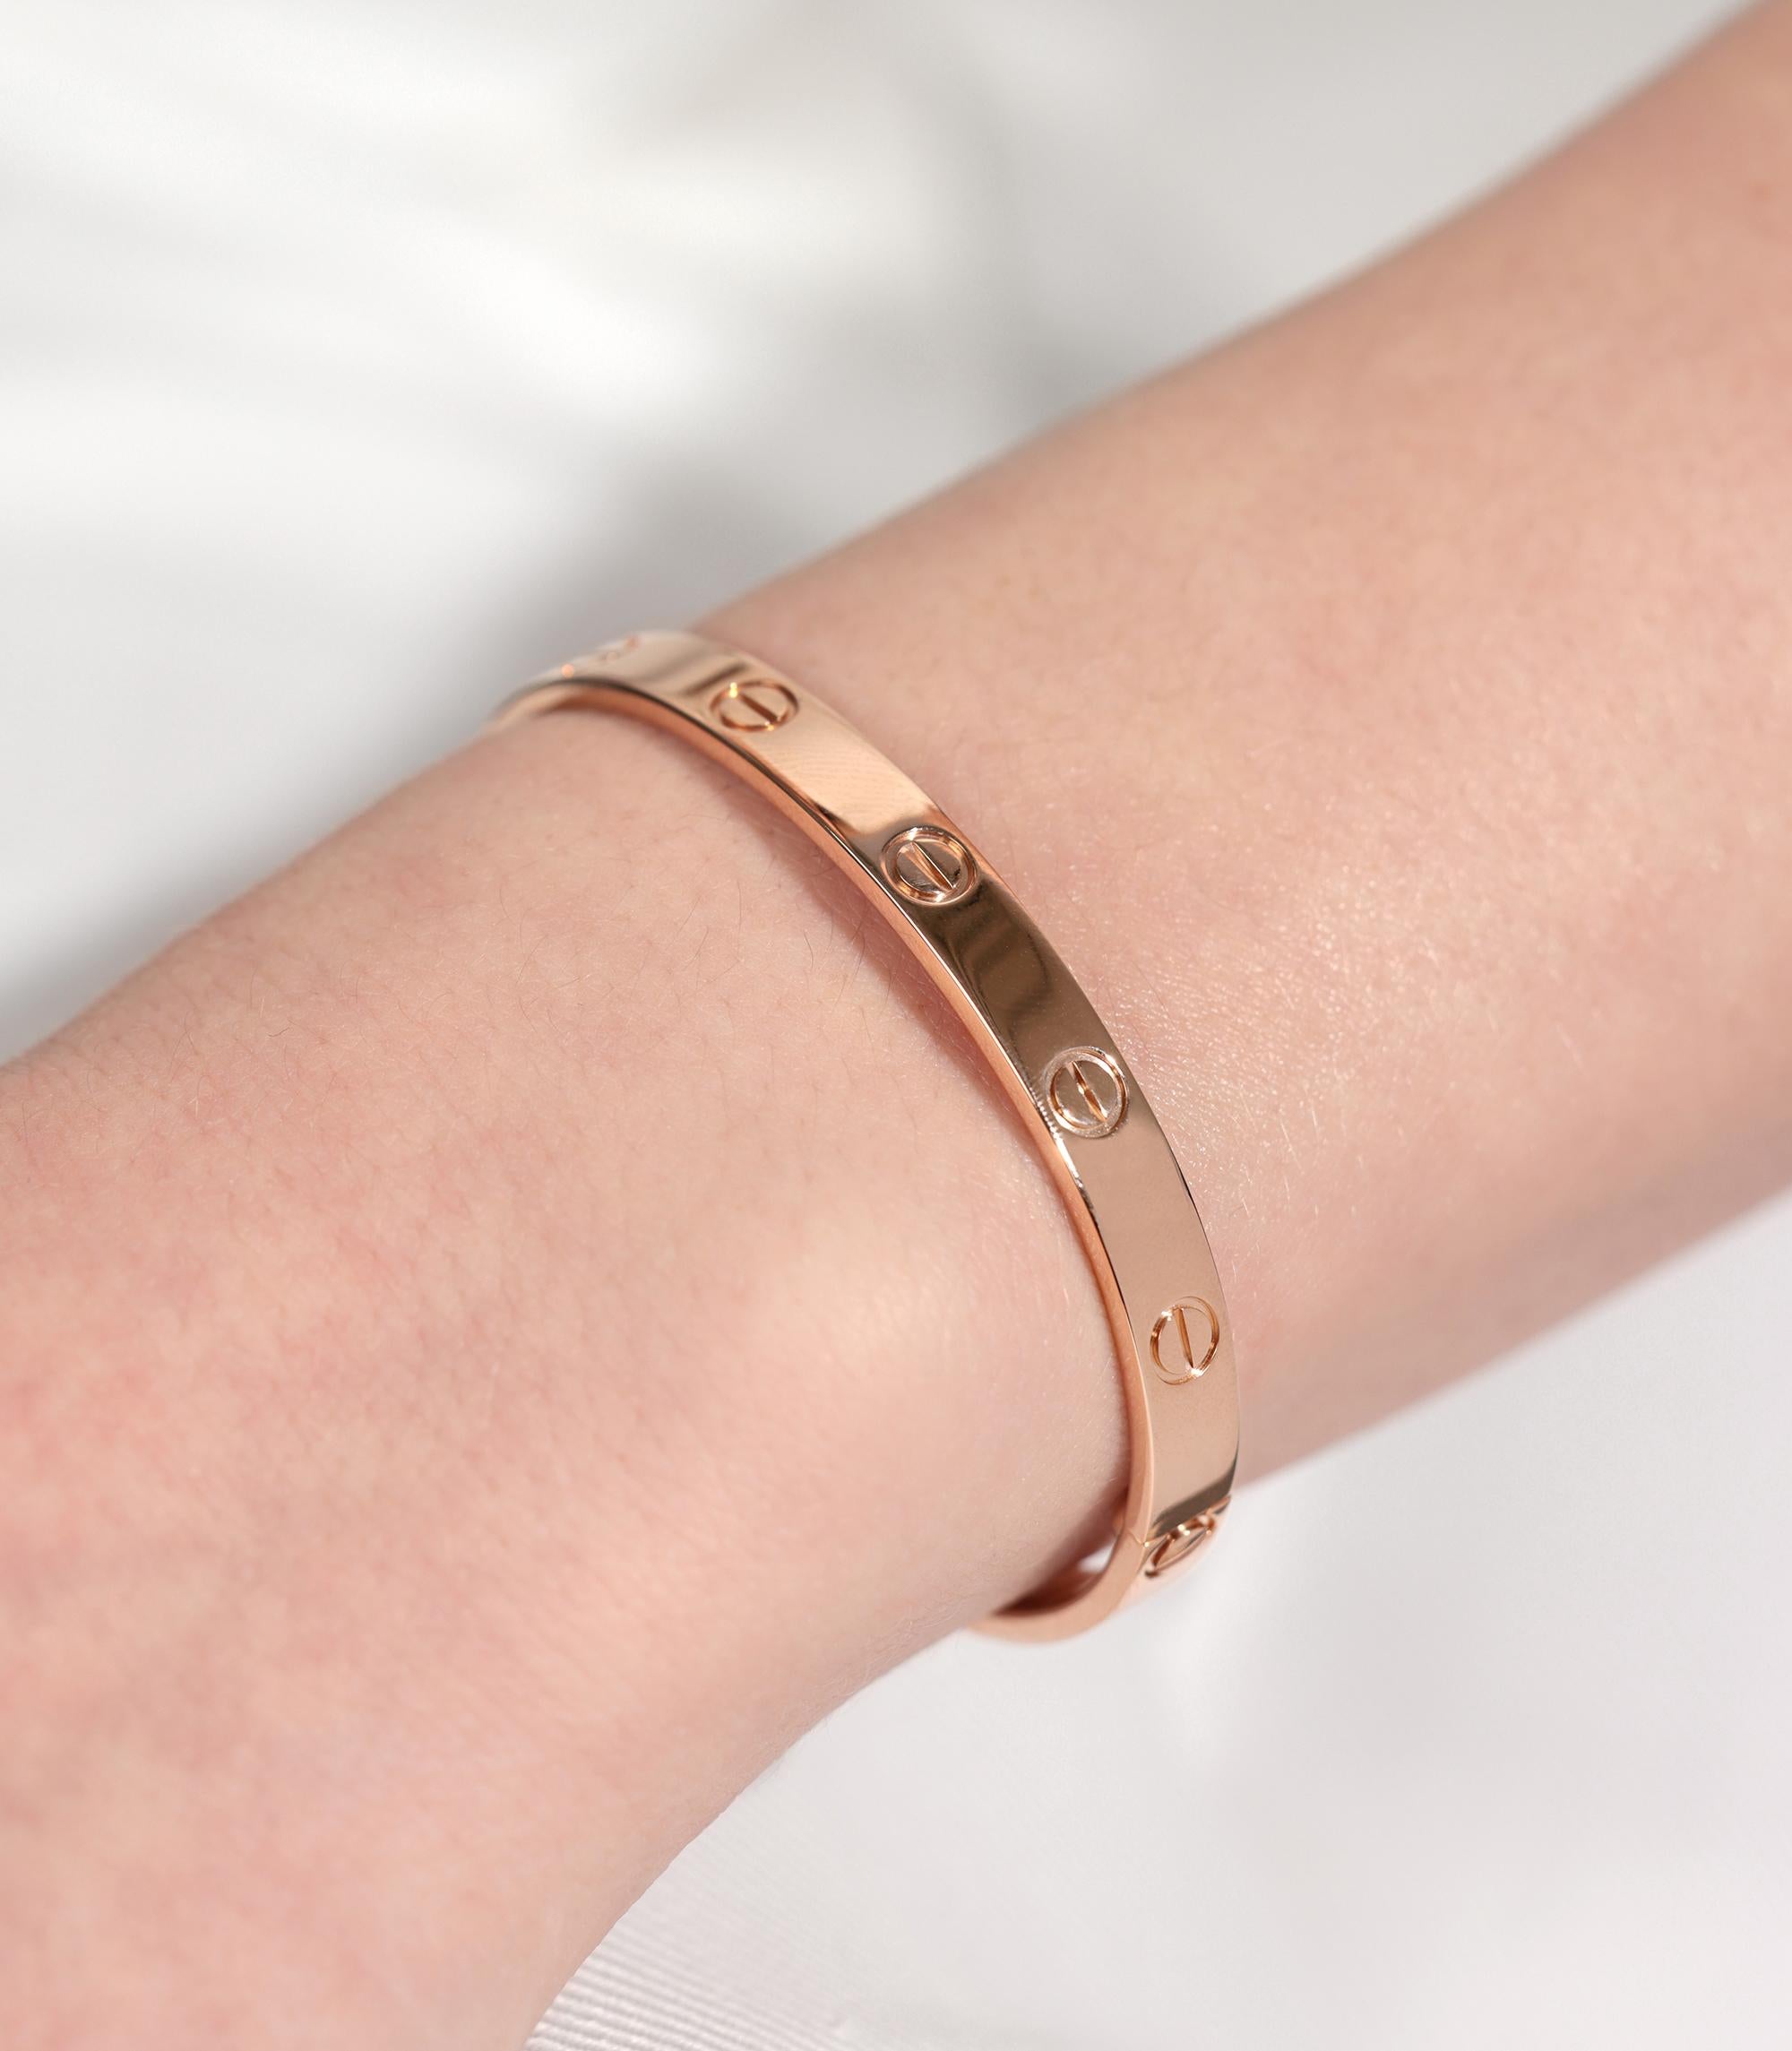 Cartier 18ct Rose Gold Love Bangle

Brand- Cartier
Model- Love Bangle
Product Type- Bracelet
Serial Number- EY****
Accompanied By- Cartier Box, Service Papers, Screwdriver
Material(s)- 18ct Rose Gold

Bracelet Length- 19cm
Bracelet Width-